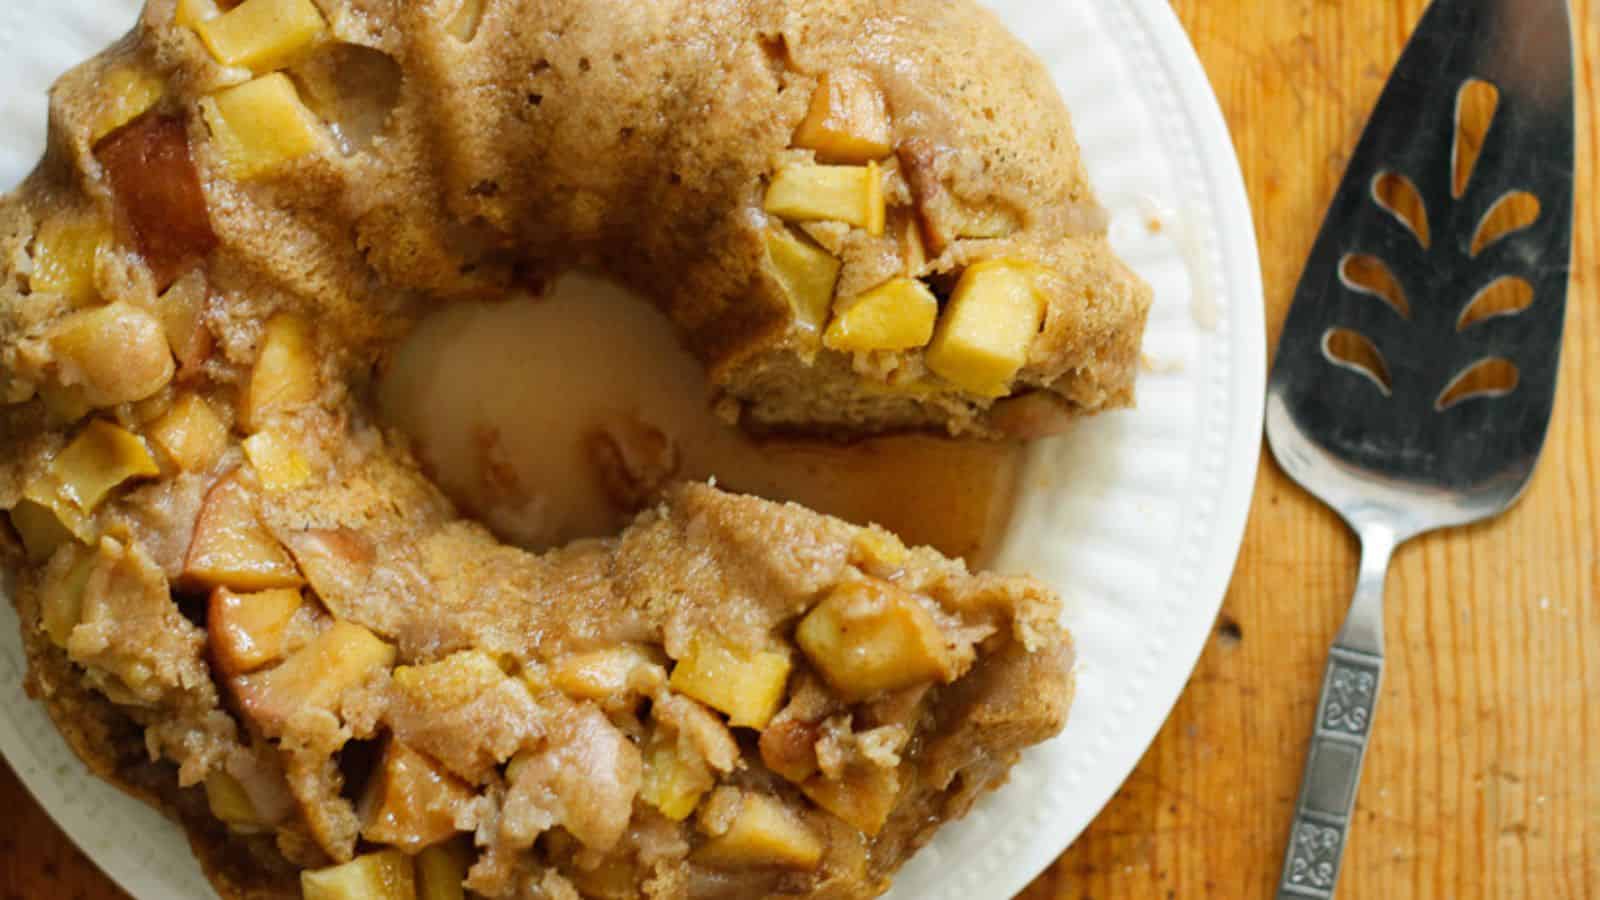 <p>The Apple Olive Oil Cake is a flavorful and moist dessert that takes about 1 hour and 15 minutes to make. Olive oil enhances the cake’s rich texture, while the natural sweetness of apples stands out. It’s a simple, satisfying choice for a graduation party.<br><strong>Get the Recipe: </strong><a href="https://immigrantstable.com/apple-olive-oil-cake/?utm_source=msn&utm_medium=page&utm_campaign=17%20classic%20graduation%20cakes%20you%20wish%20you%20had%20in%20high%20school%20">Apple olive oil cake</a></p>